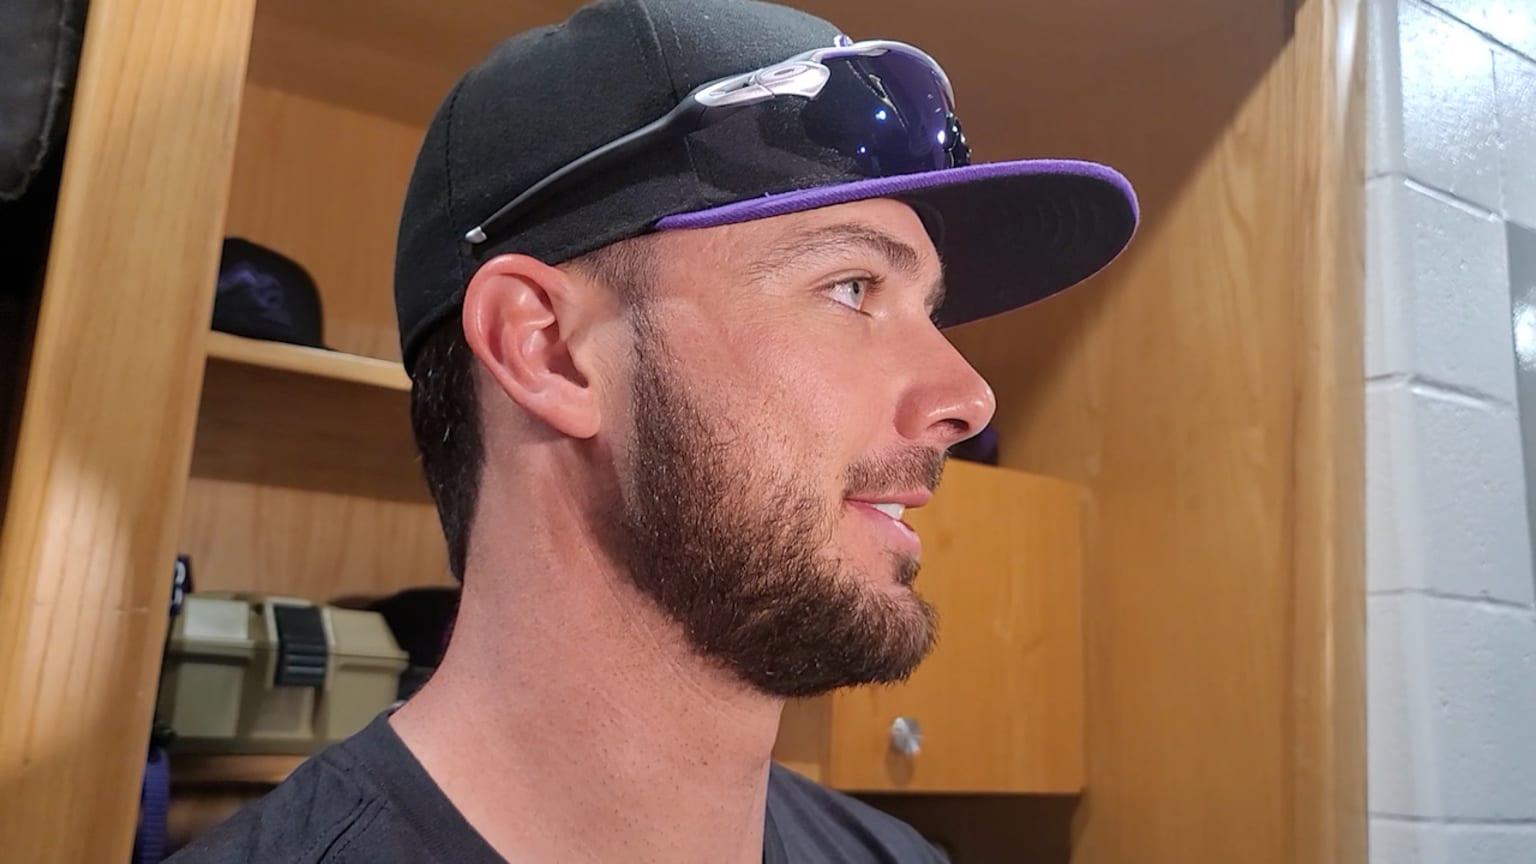 Kris Bryant Will Prove You Wrong in 2023 - 5280